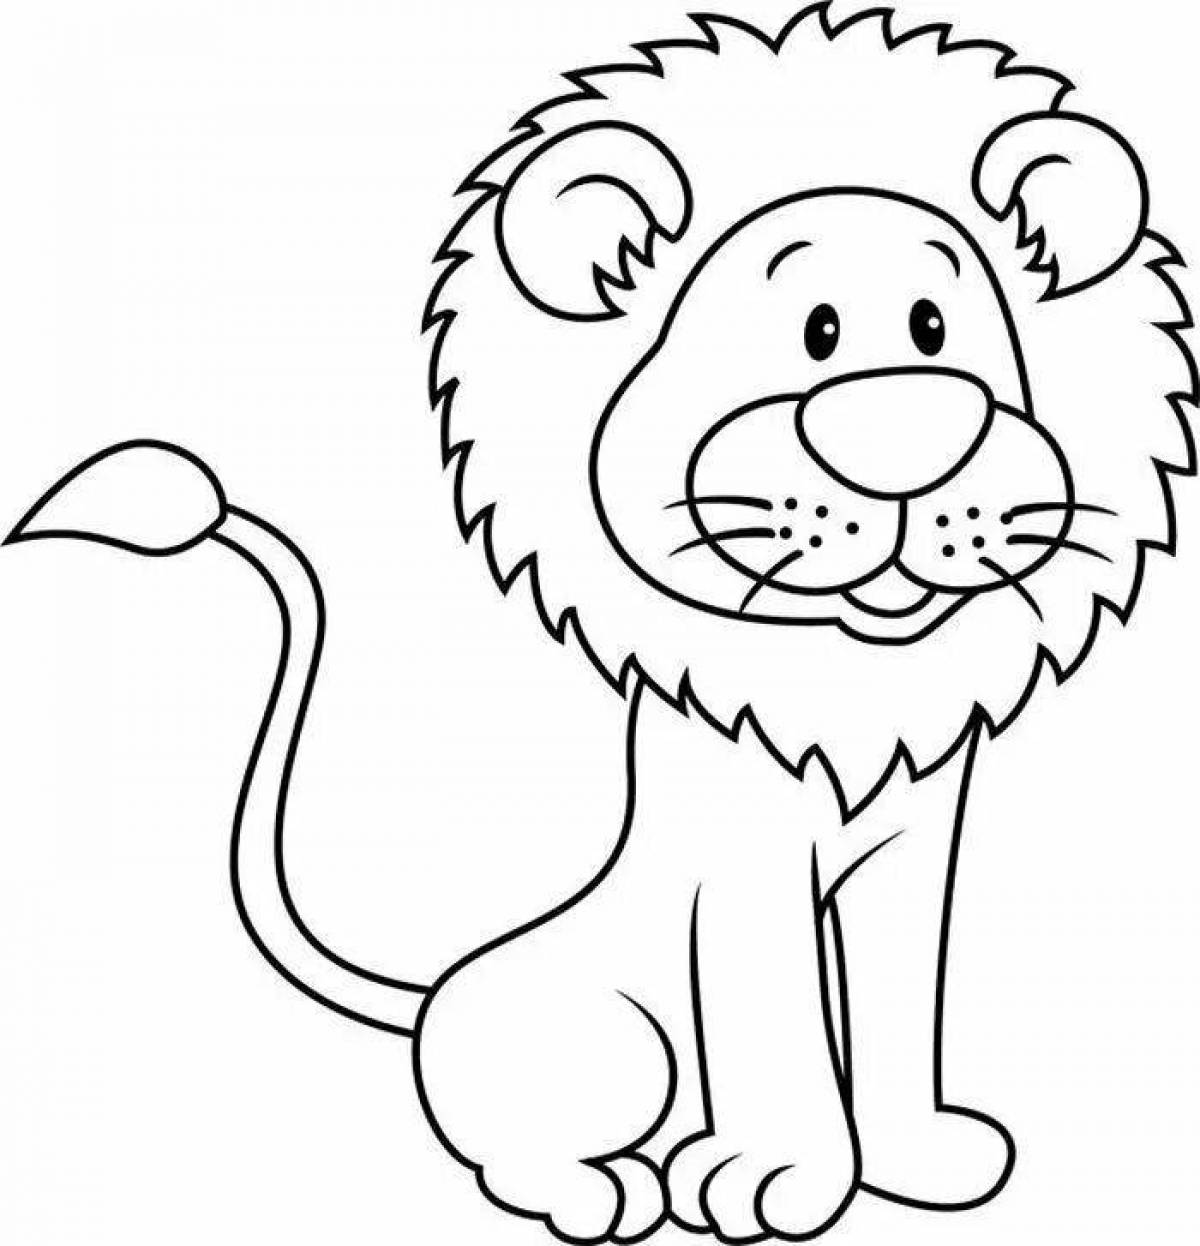 Animated lion cub coloring page